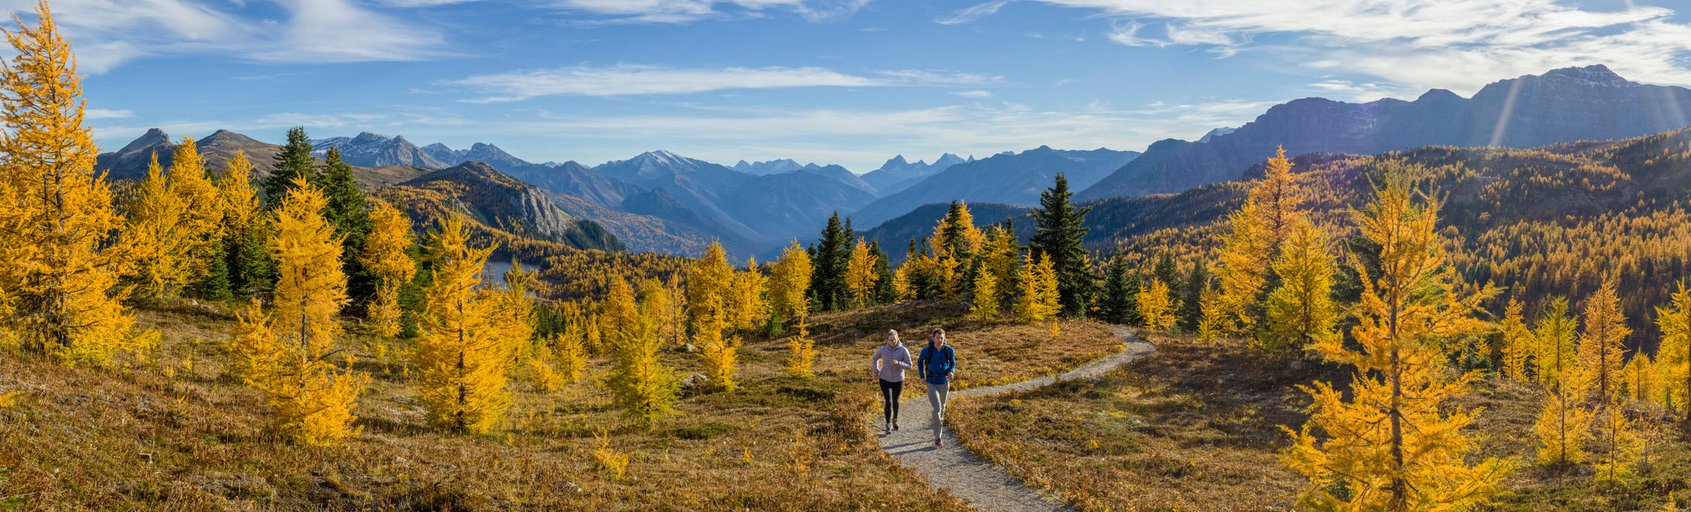 Two hikers in Sunshine Meadows during larch season.